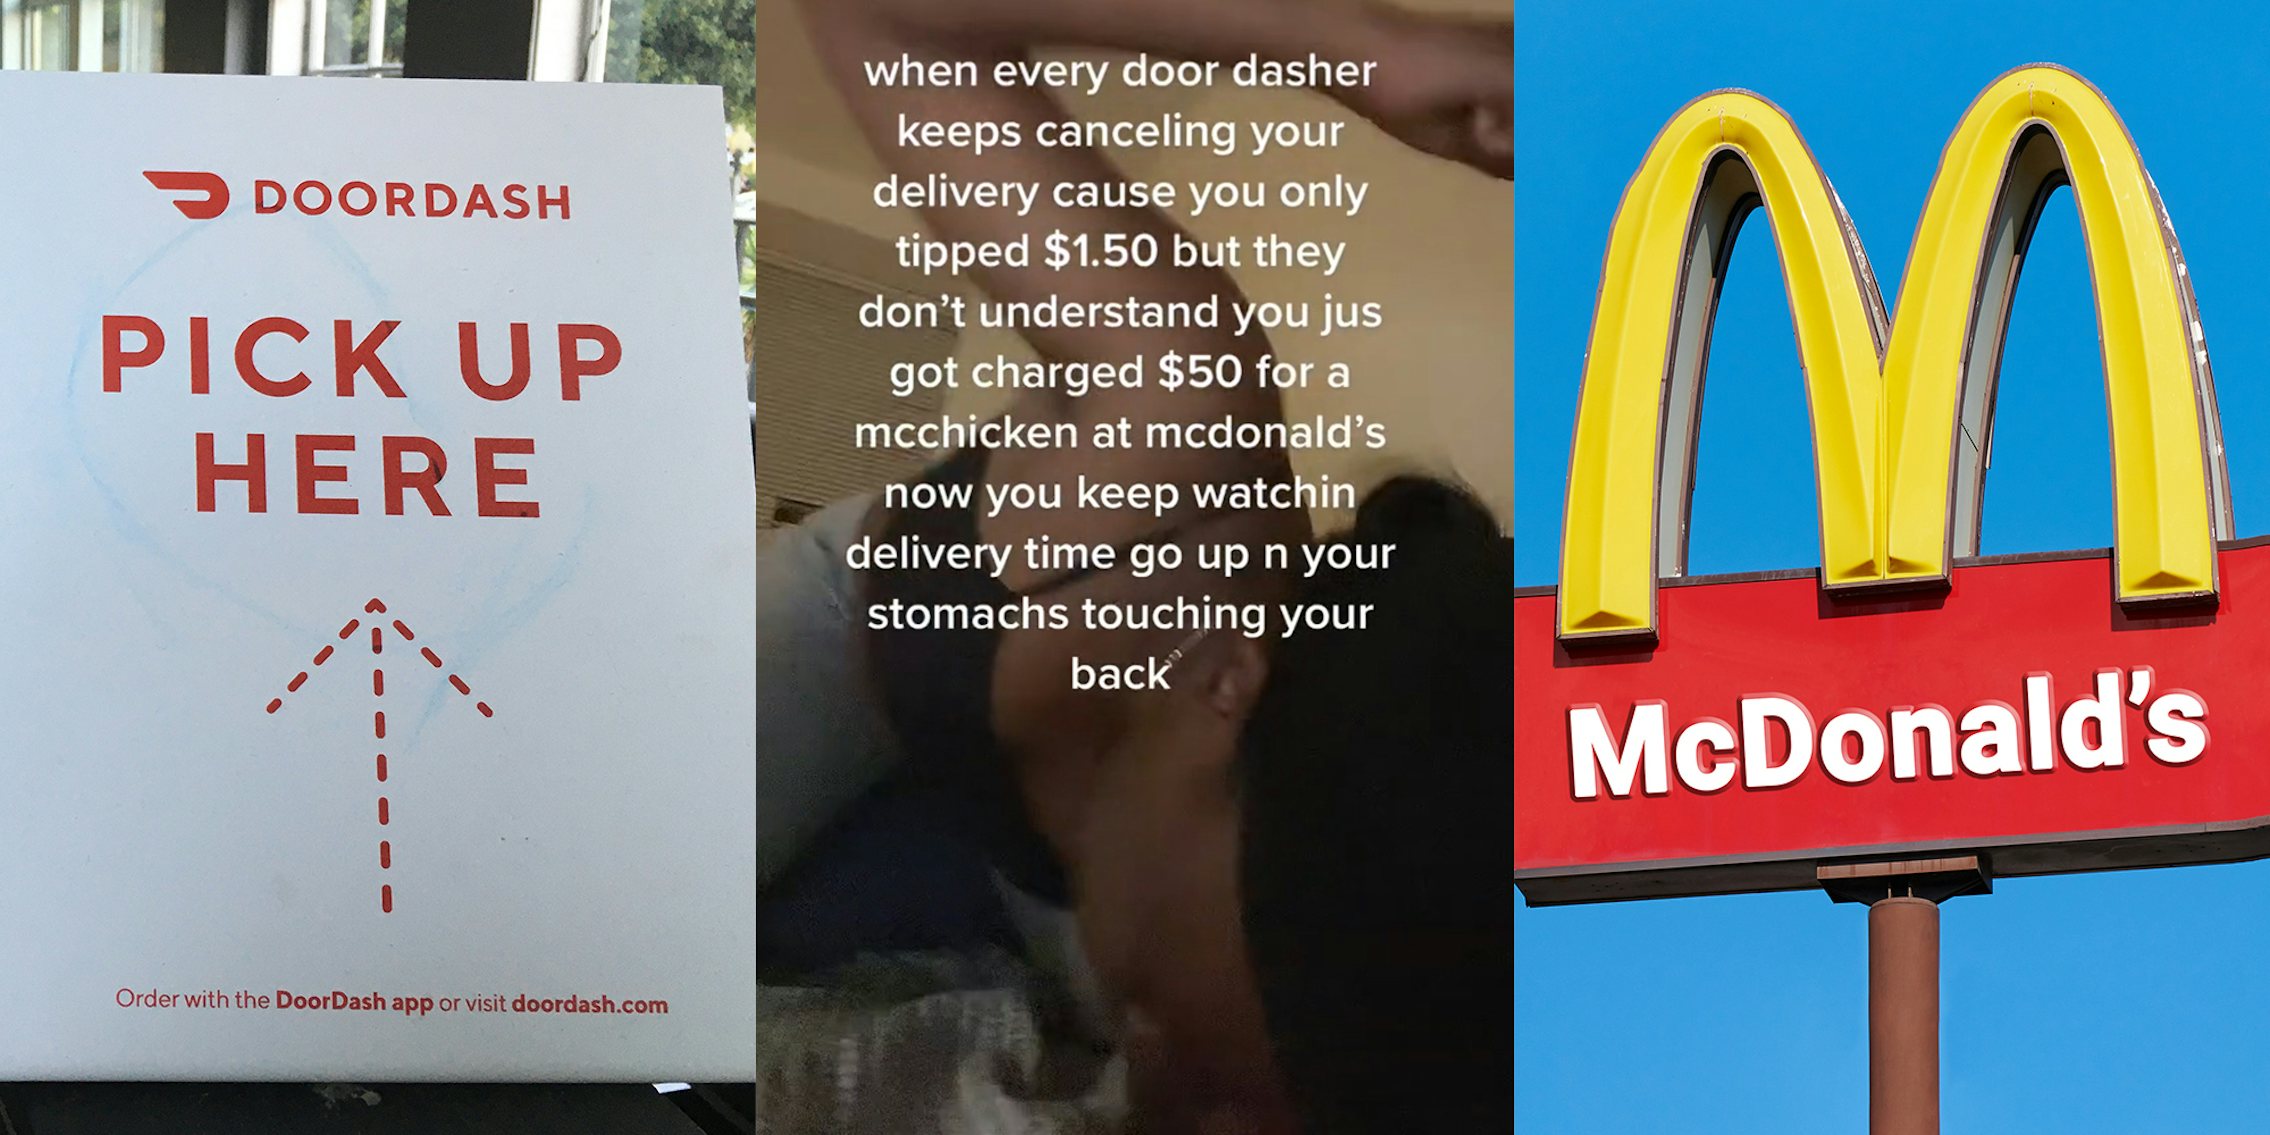 doordash sign (l) woman on bed with caption 'when every door dasher keeps canceling your delivery cause you only tipped $1.50 but they don't understand you jus got charged $50 for a mcchicken at mcdonald's now you keep watchin delivery time go up n your stomachs touching your back' (c) McDonald's sign (r)